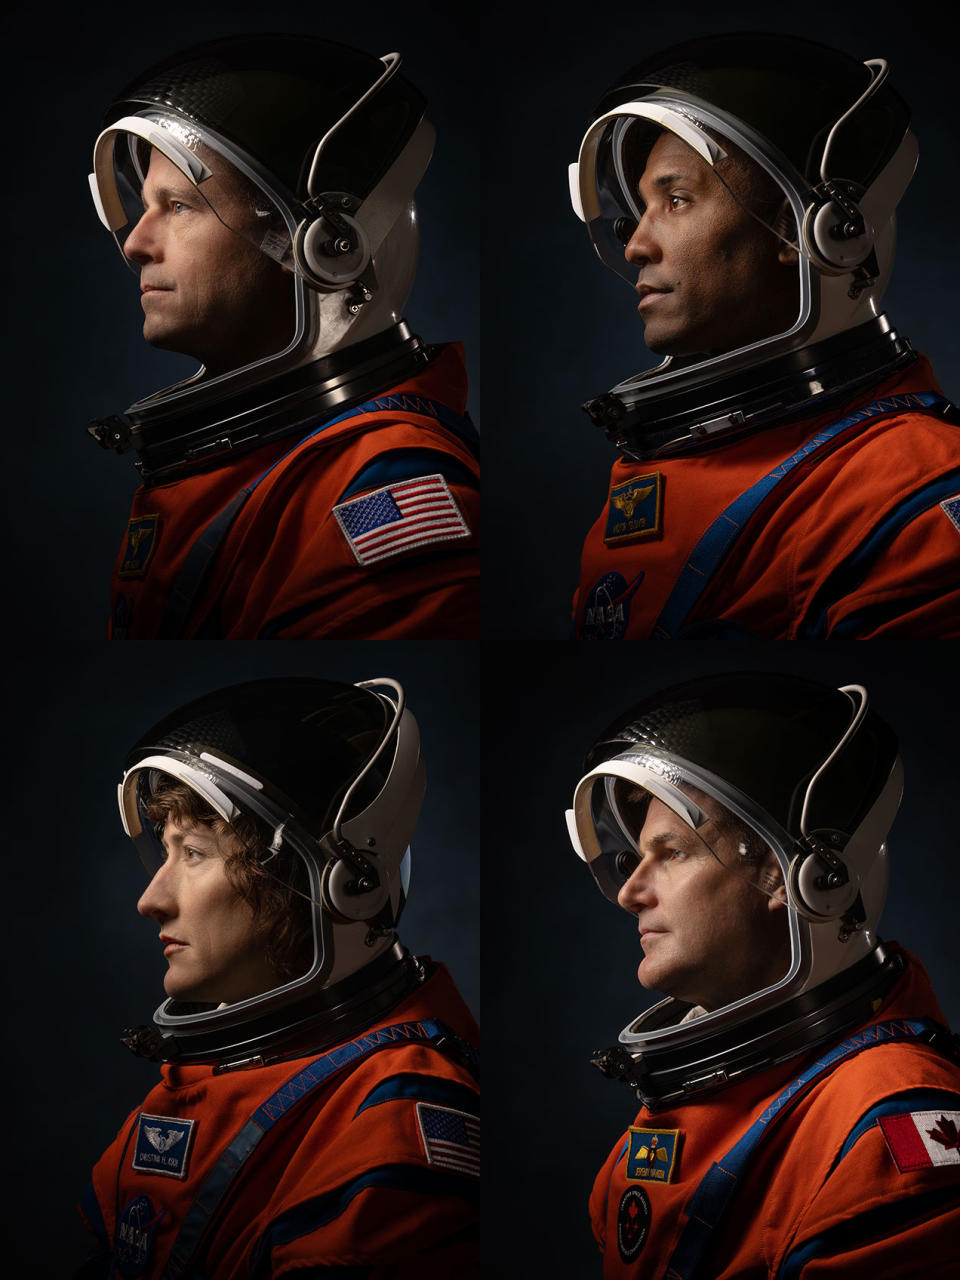 As a crew of four or as individuals, the Artemis II crew of Reid Wiseman, Victor Glover, Christina Koch and Jeremy Hansen are set to establish firsts and break records.